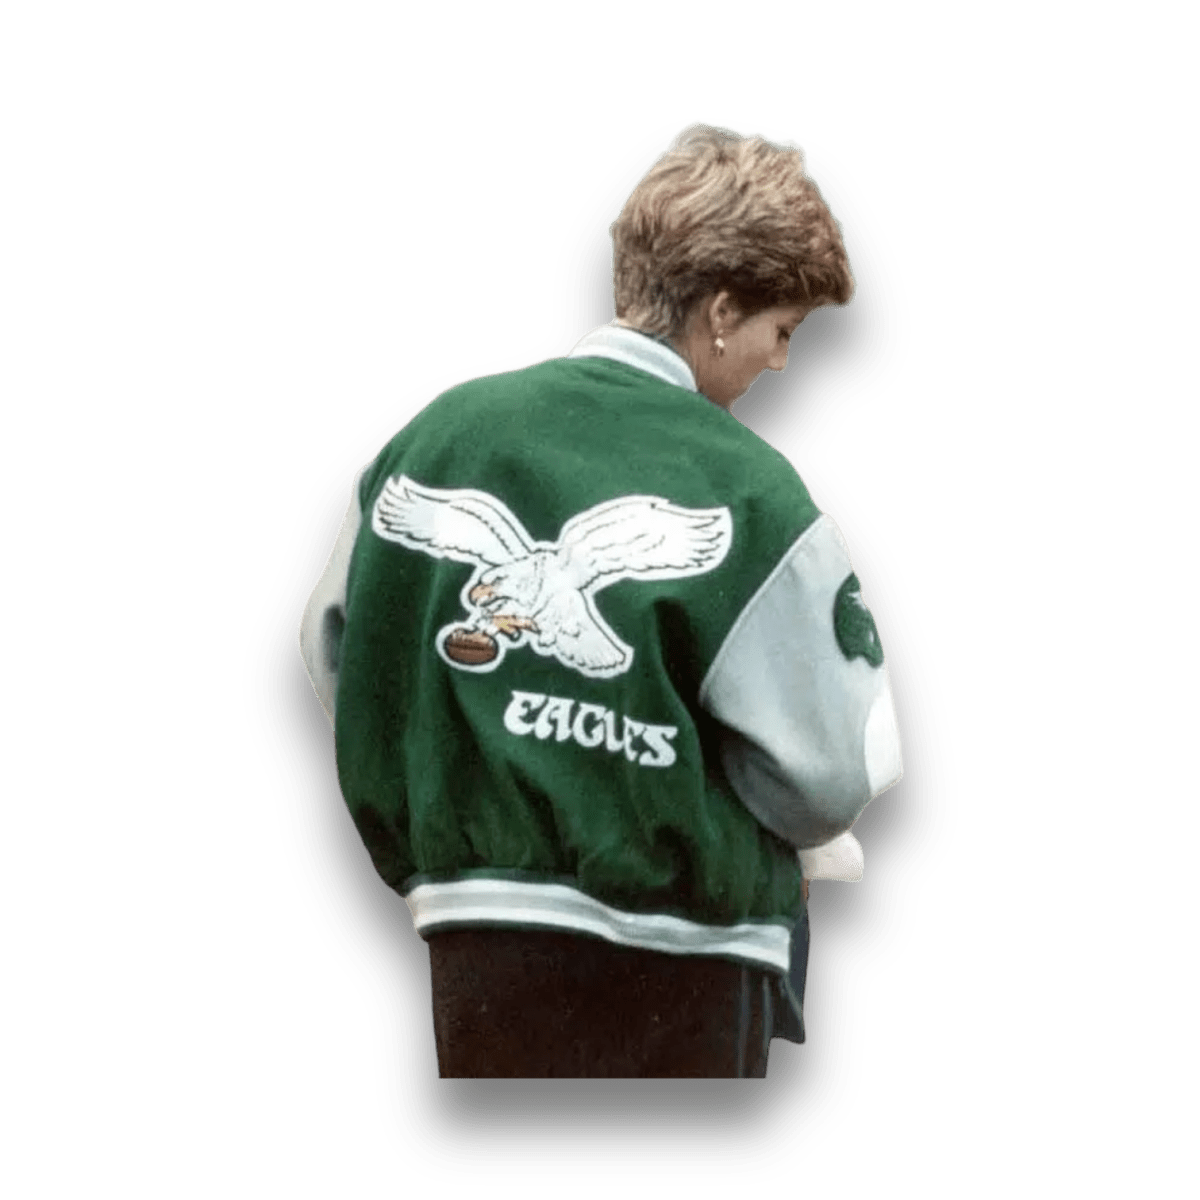 Mitchell & Ness “Princess Diana” Varsity Eagles Jacket - Outerwear - Mitchell & Ness - Jawns on Fire - sneakers